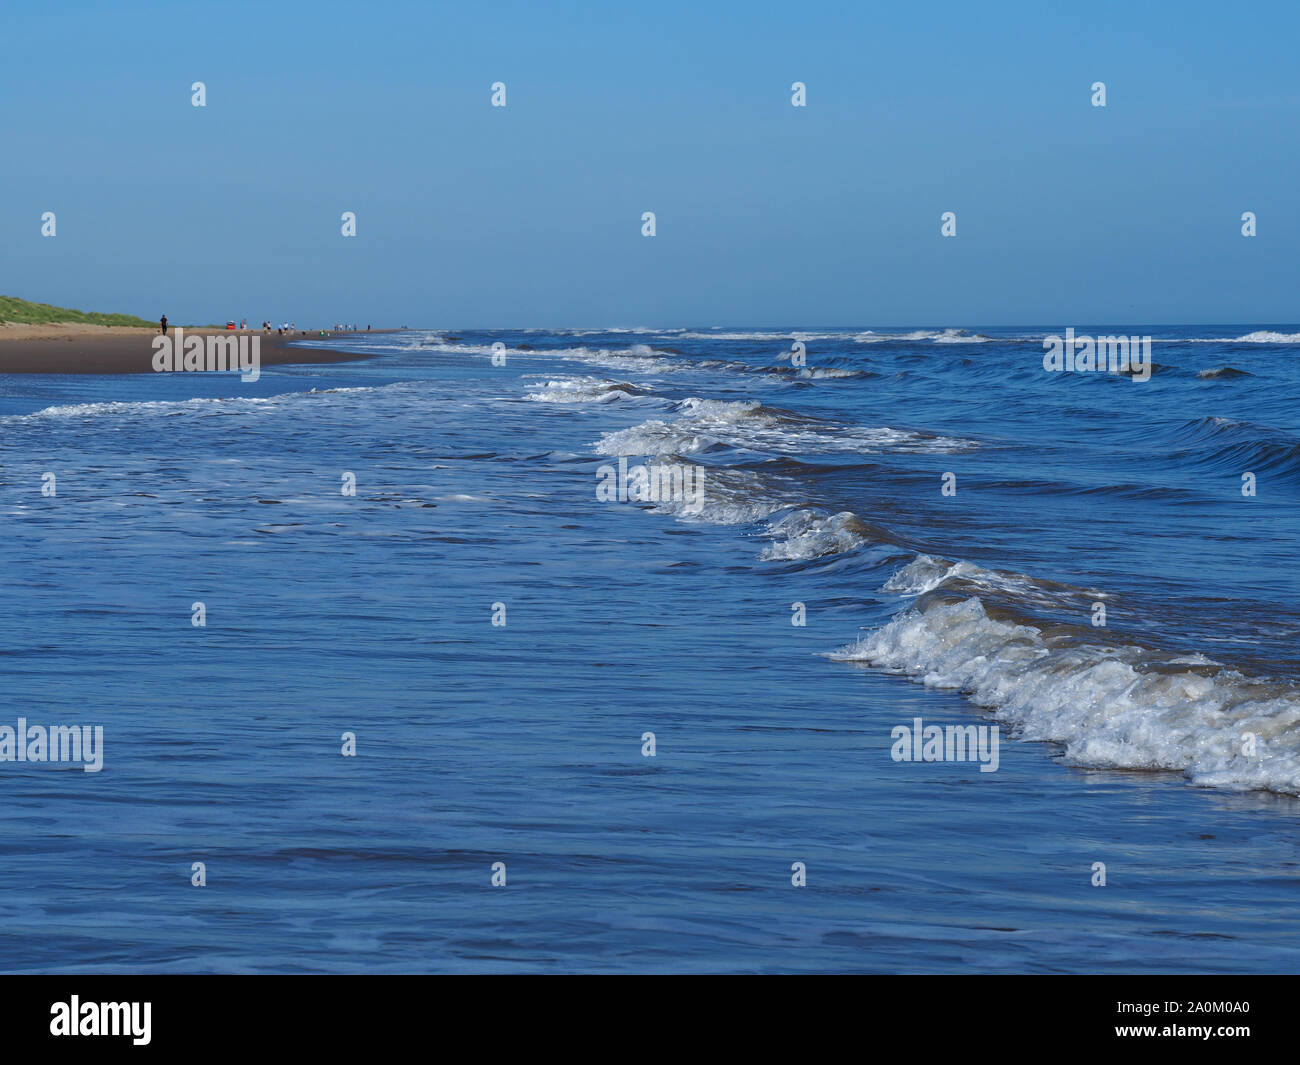 Gentle sea waves approaching the sandy beach at Mablethorpe, Lincolnshire, England, with a clear blue sky Stock Photo